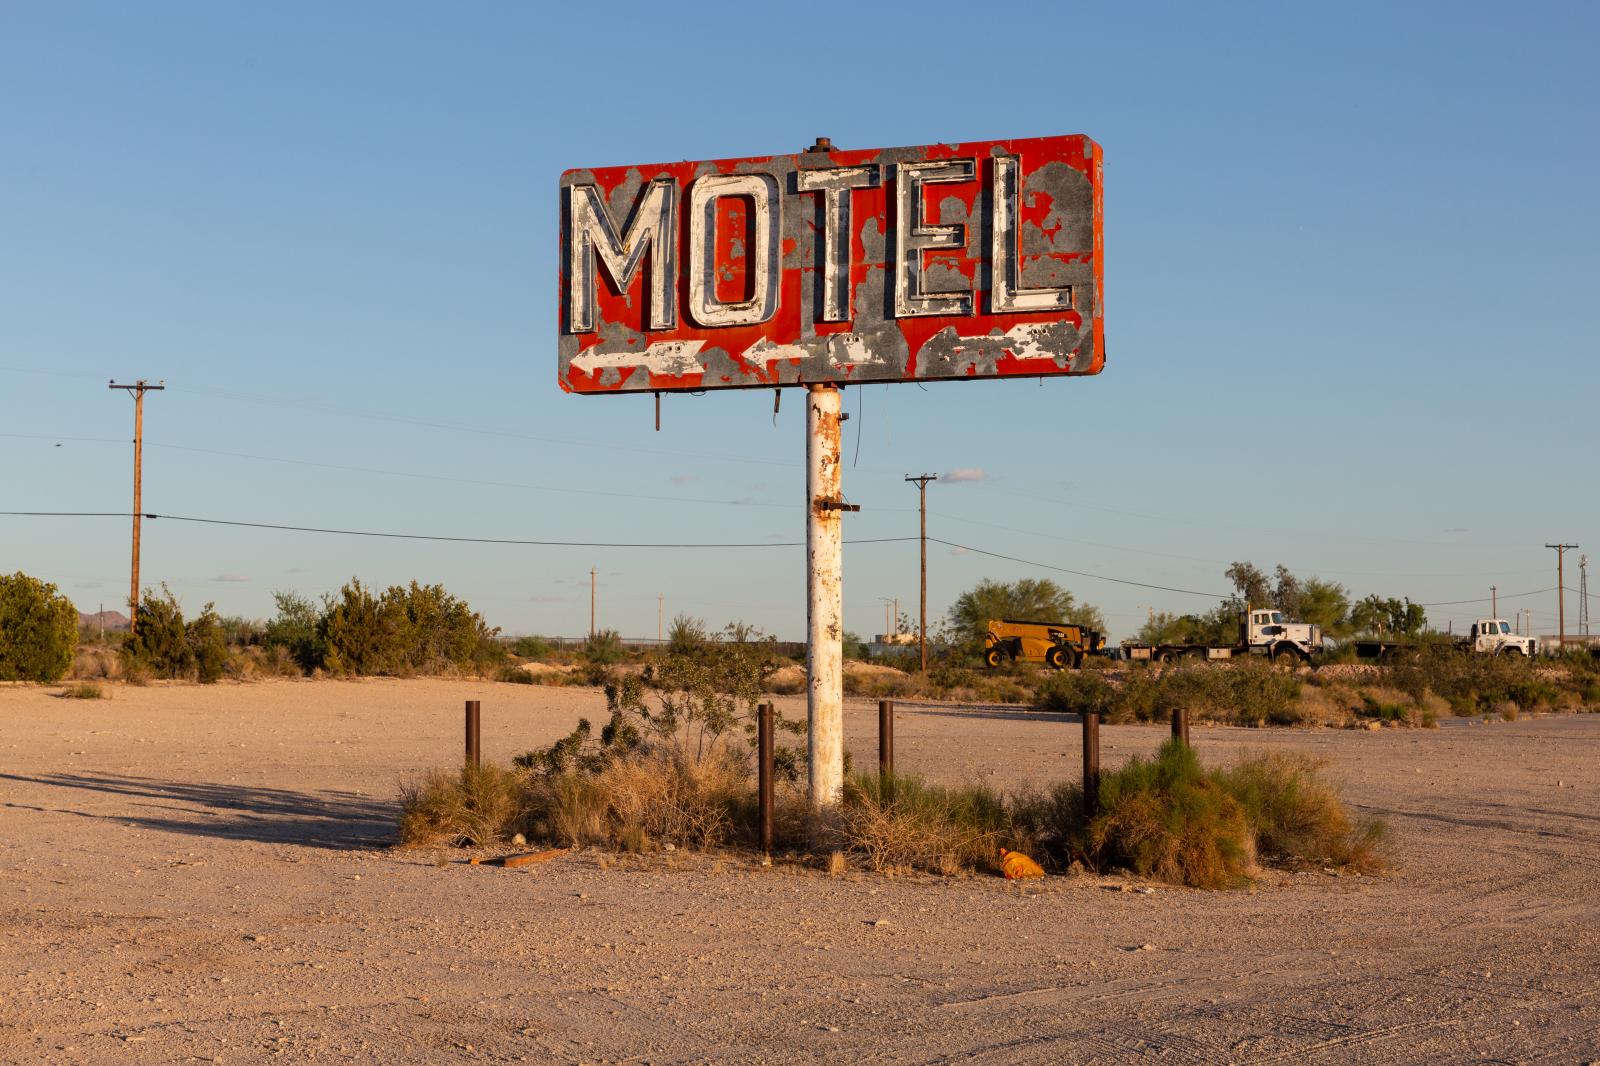 Motel Sign | Buy this image